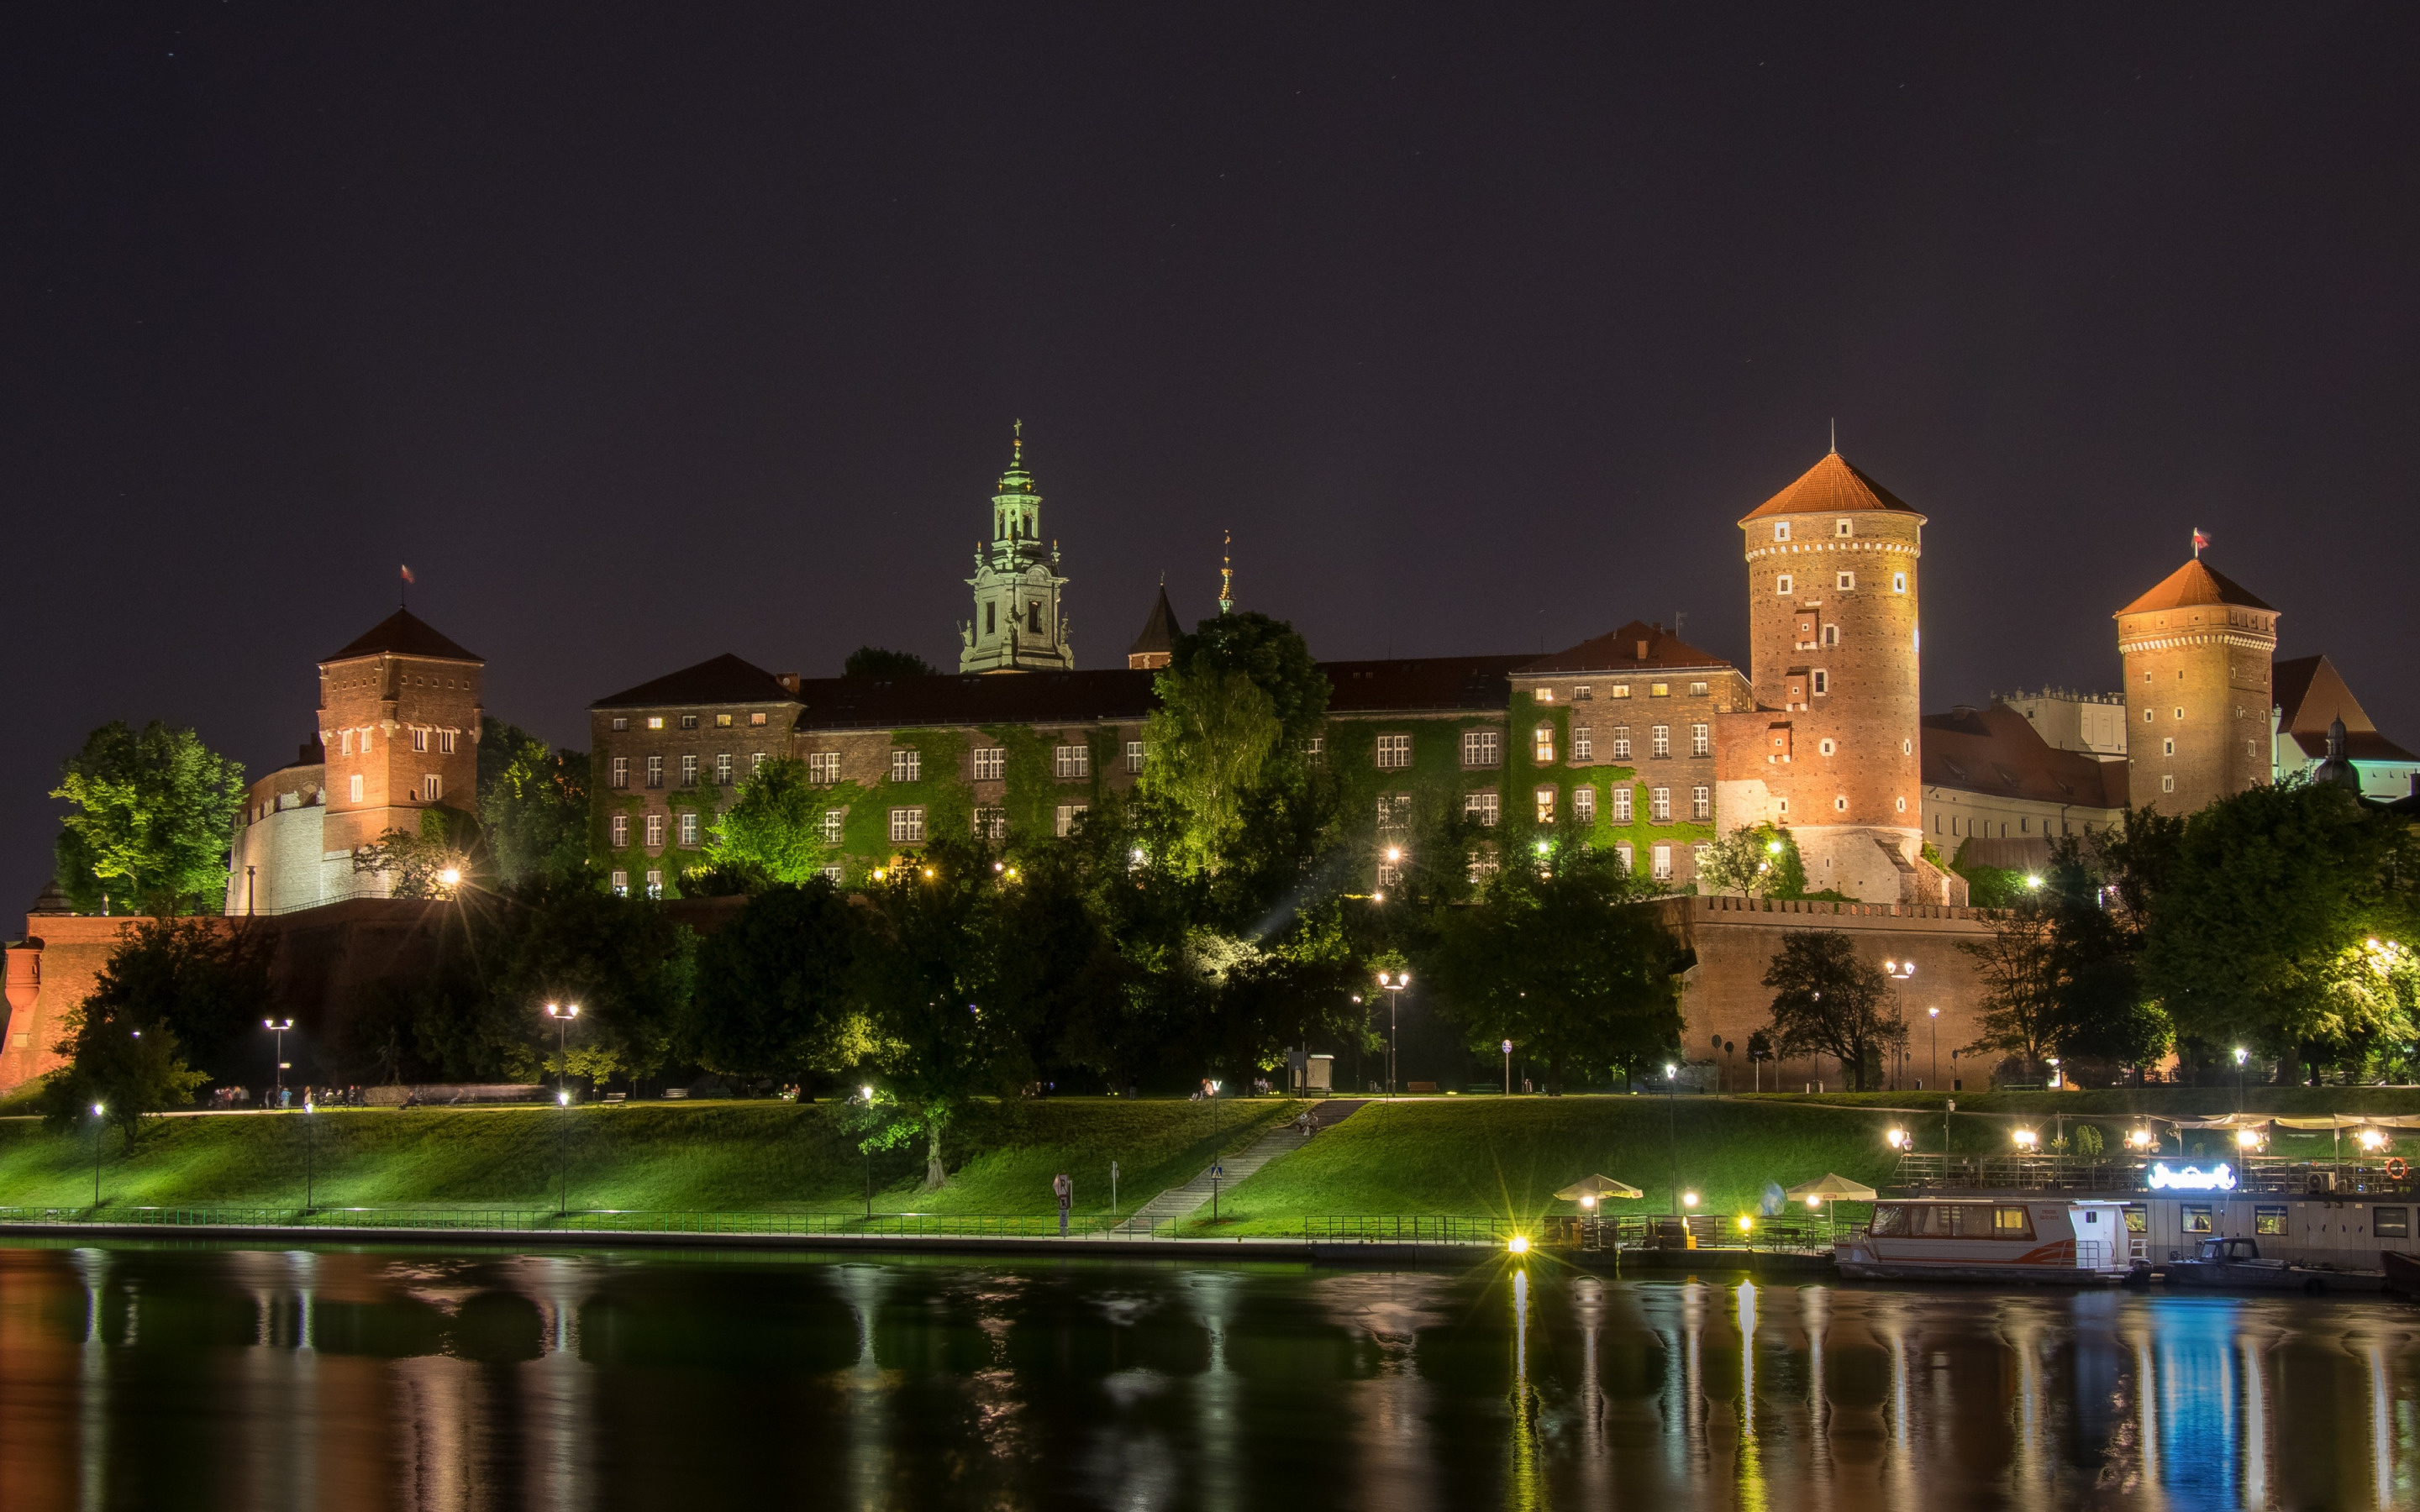 Wawel Castle wallpapers, Night view, Beautiful castles, High-quality pictures, 2880x1800 HD Desktop